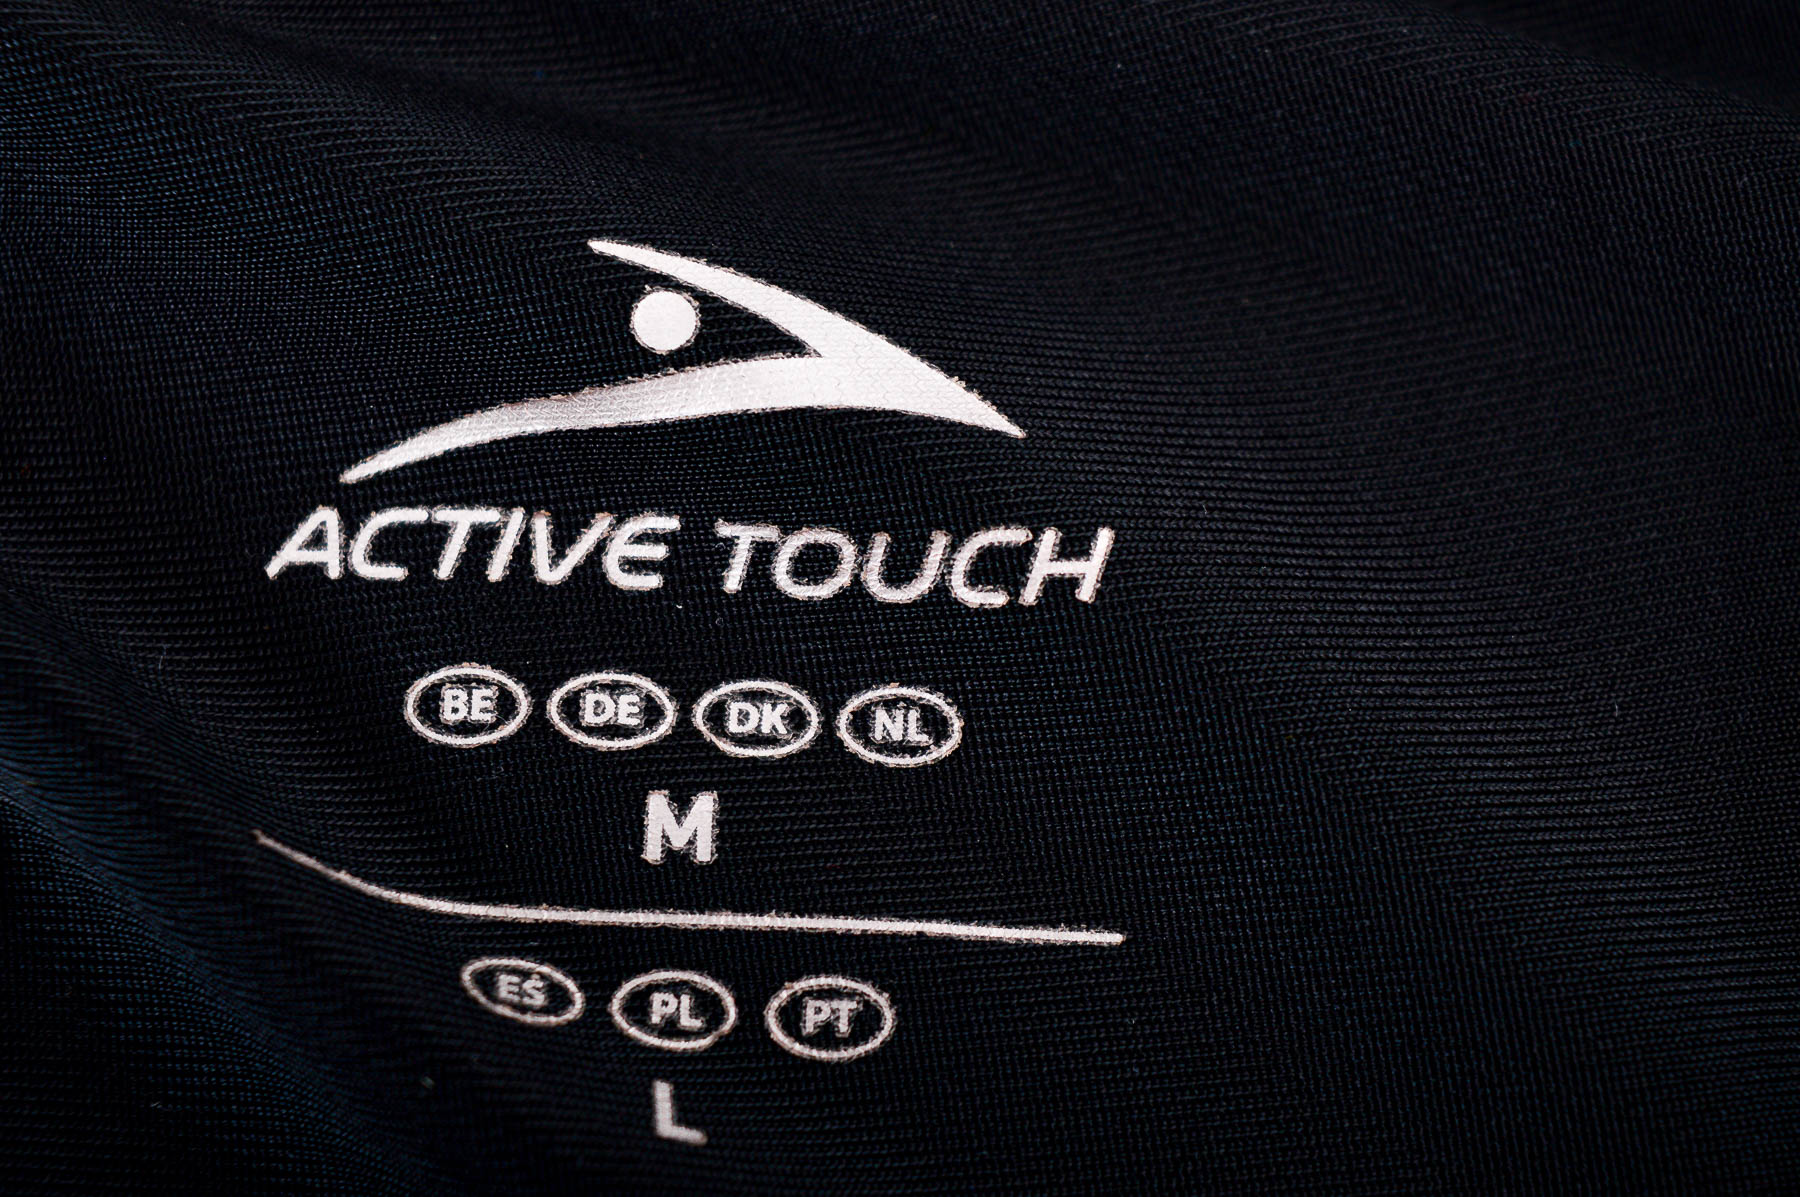 Man's cycling tights - Active Touch - 2